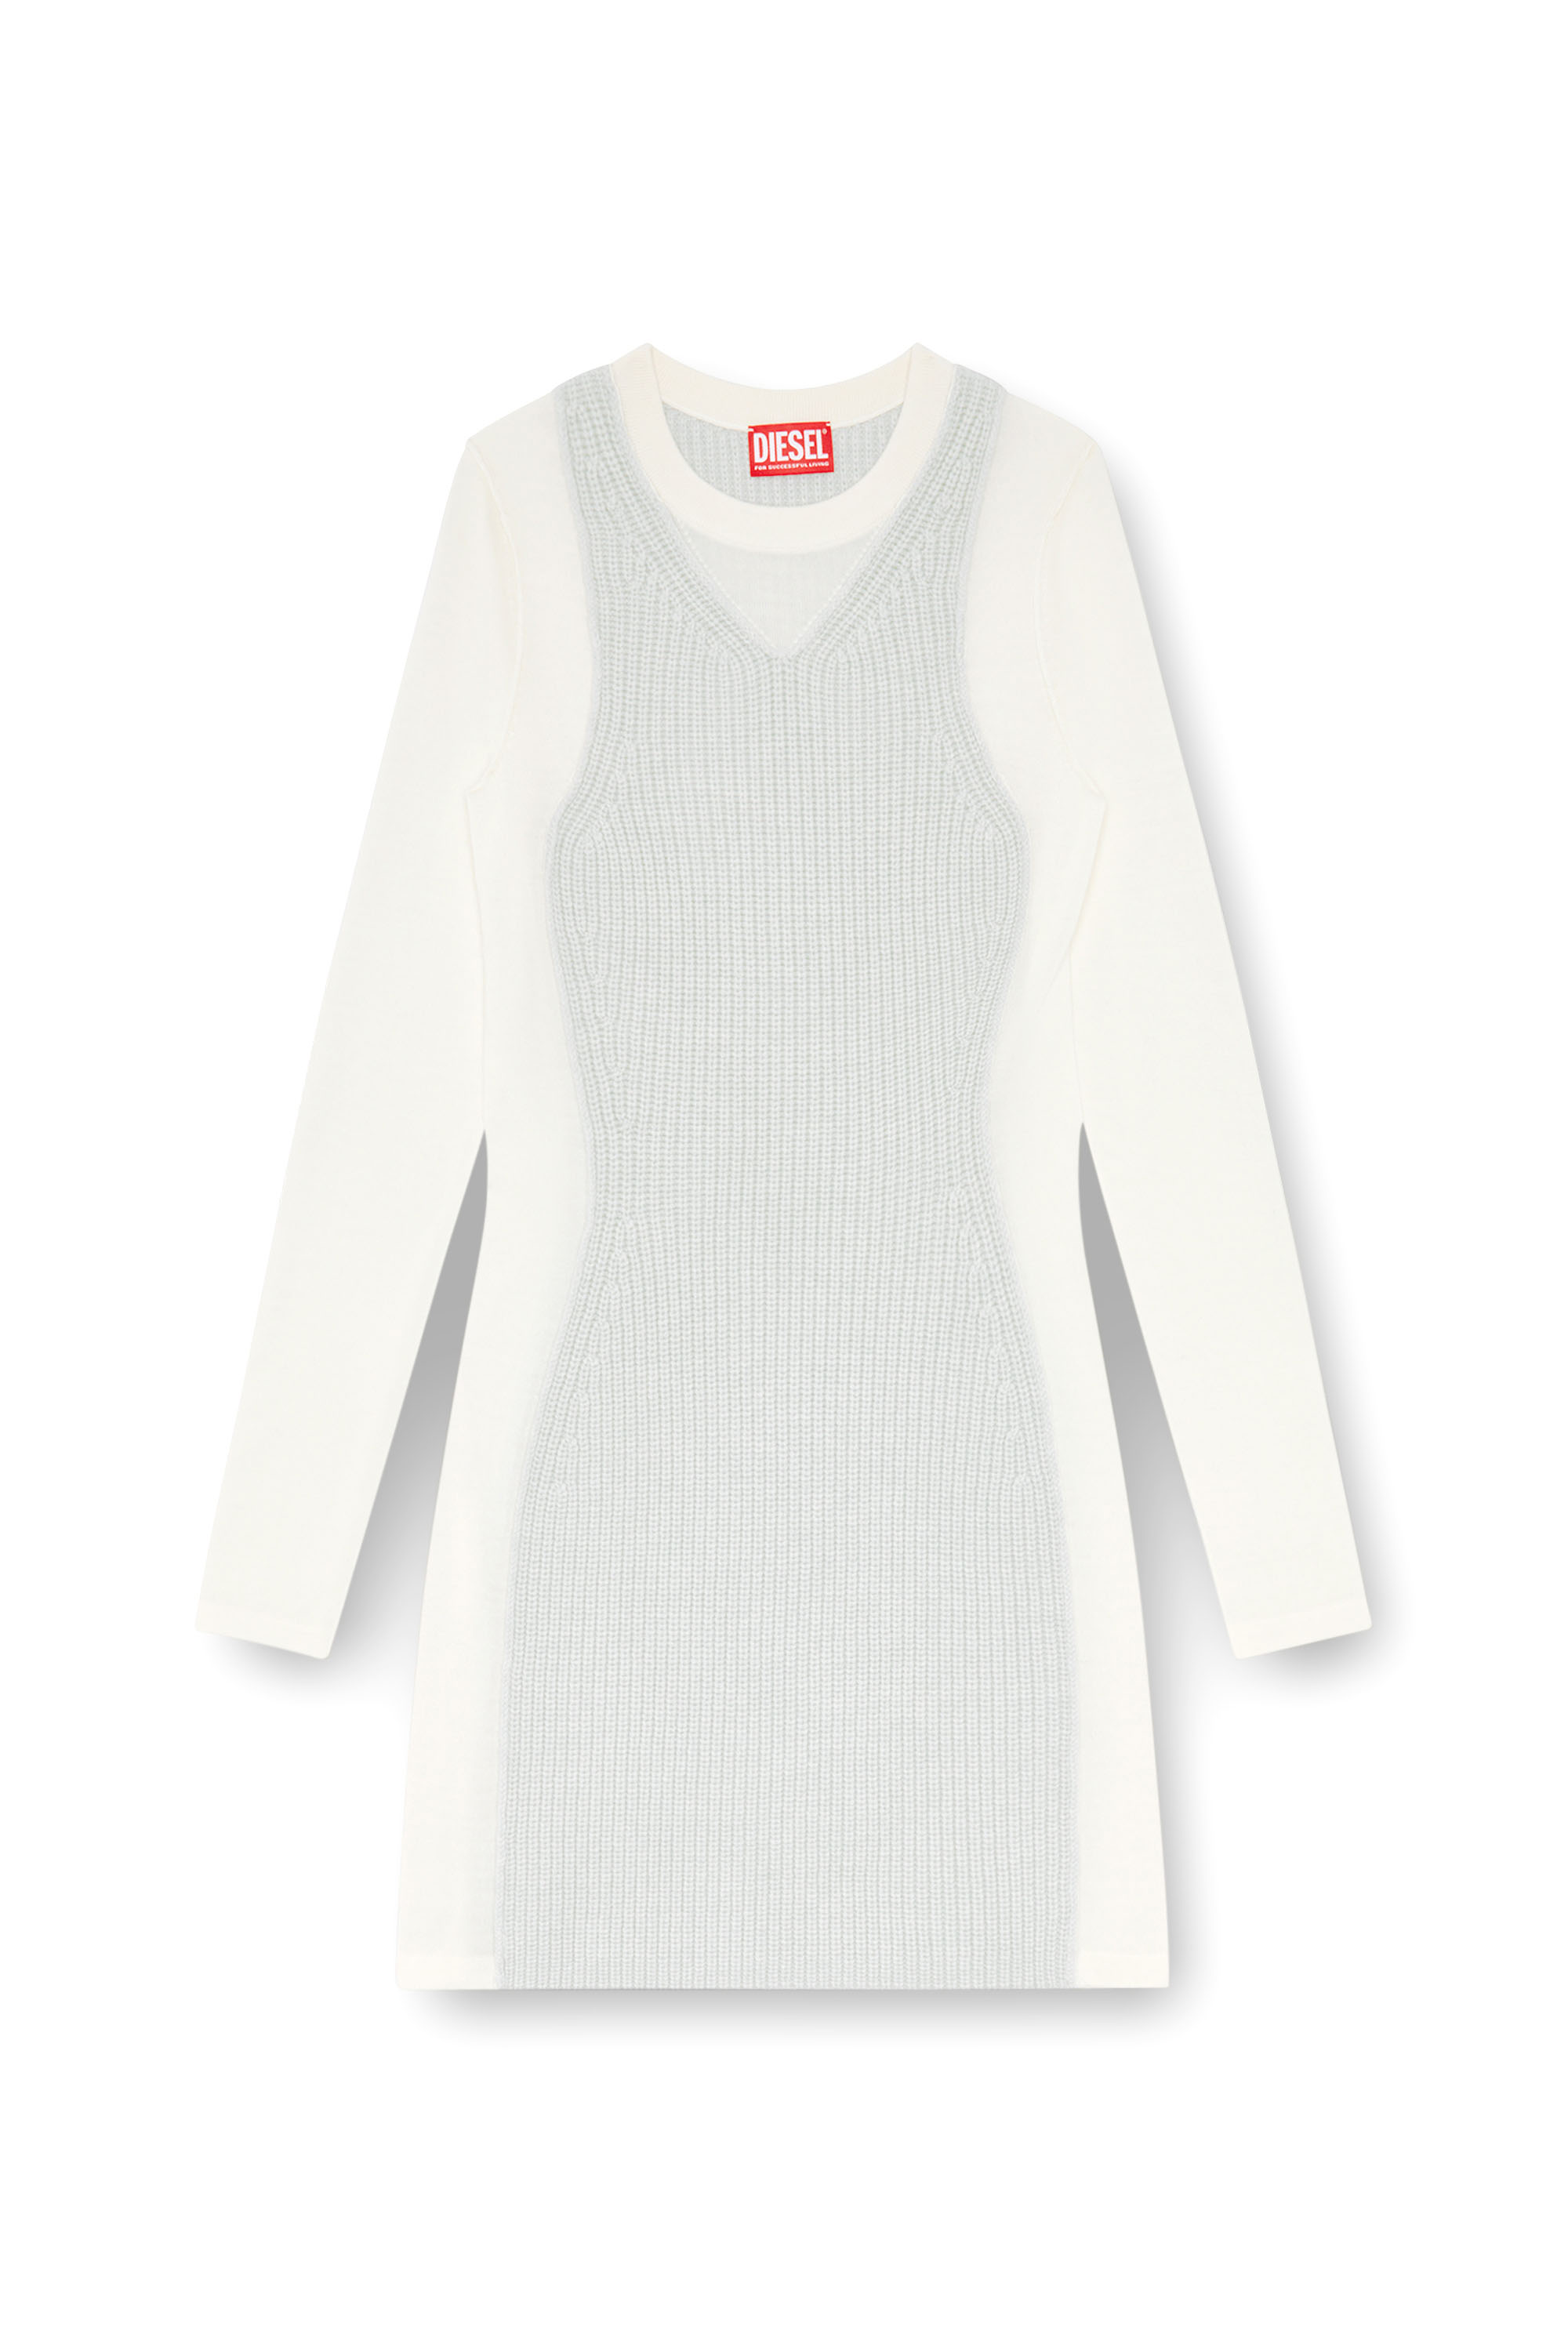 Diesel - M-ARENA, Female Short knit dress with layered effect in ホワイト - Image 2